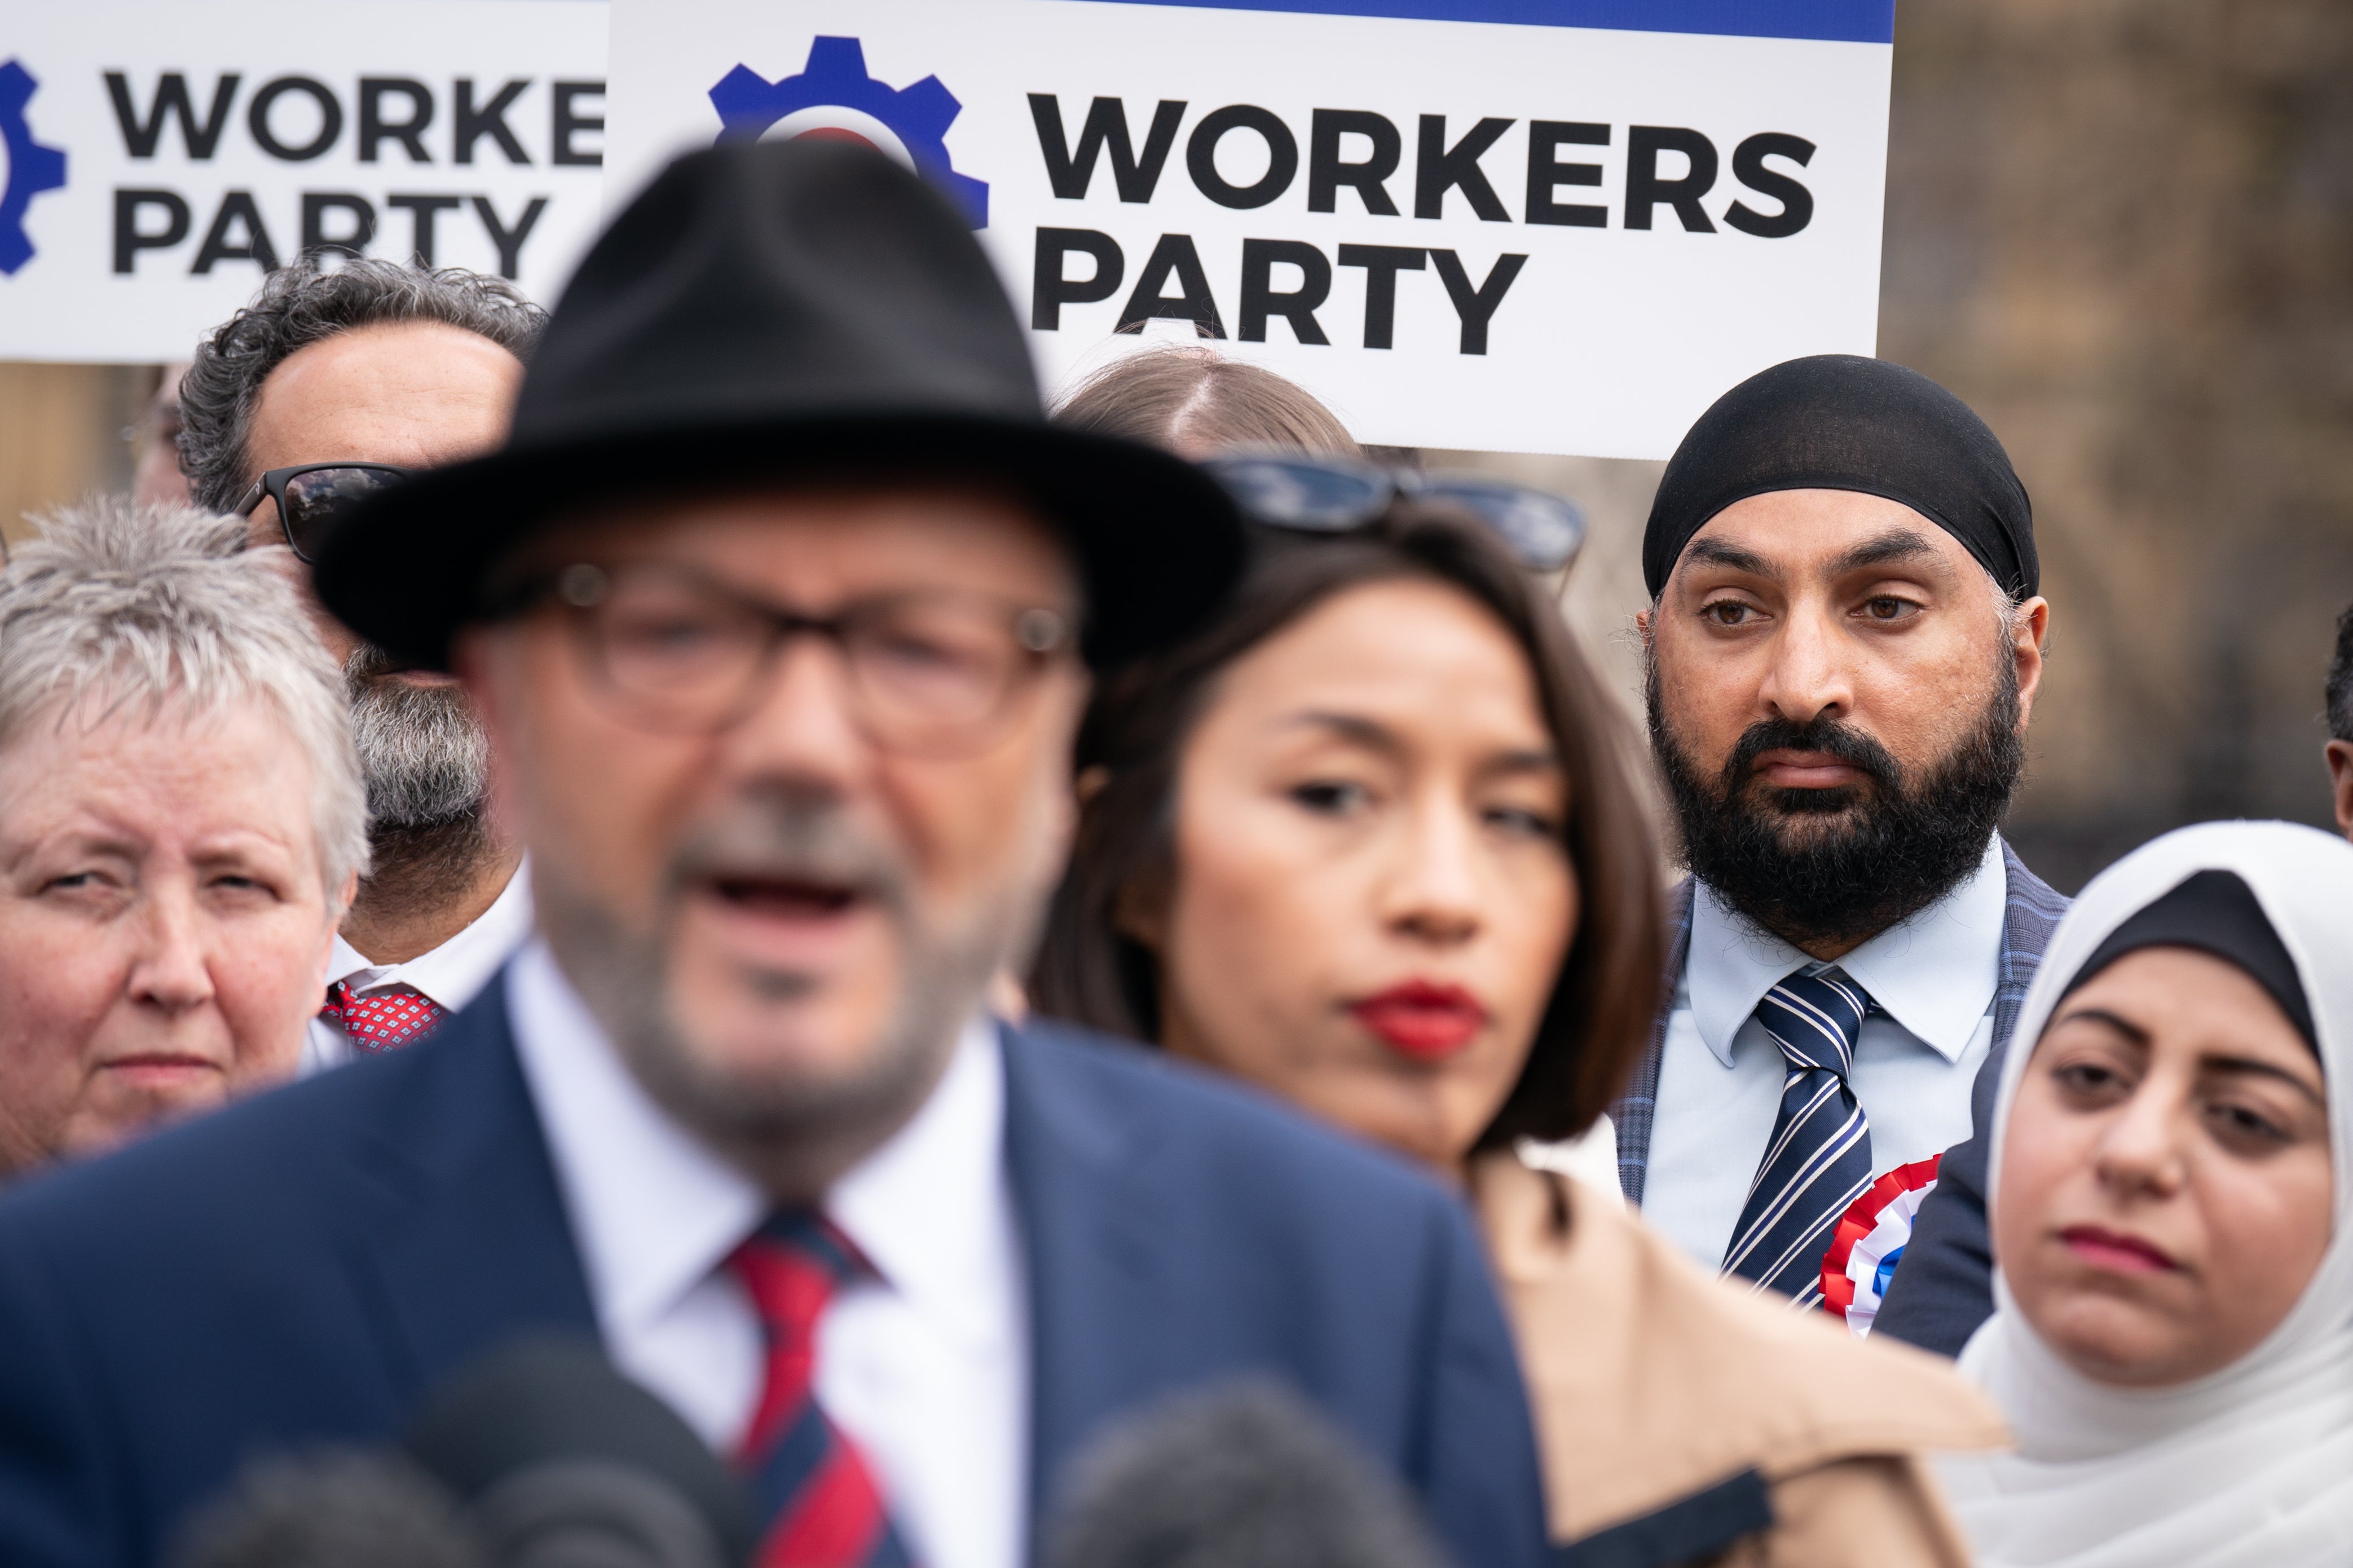 Monty Panesar will represent George Galloway’s Workers of Britain party in Ealing Southall